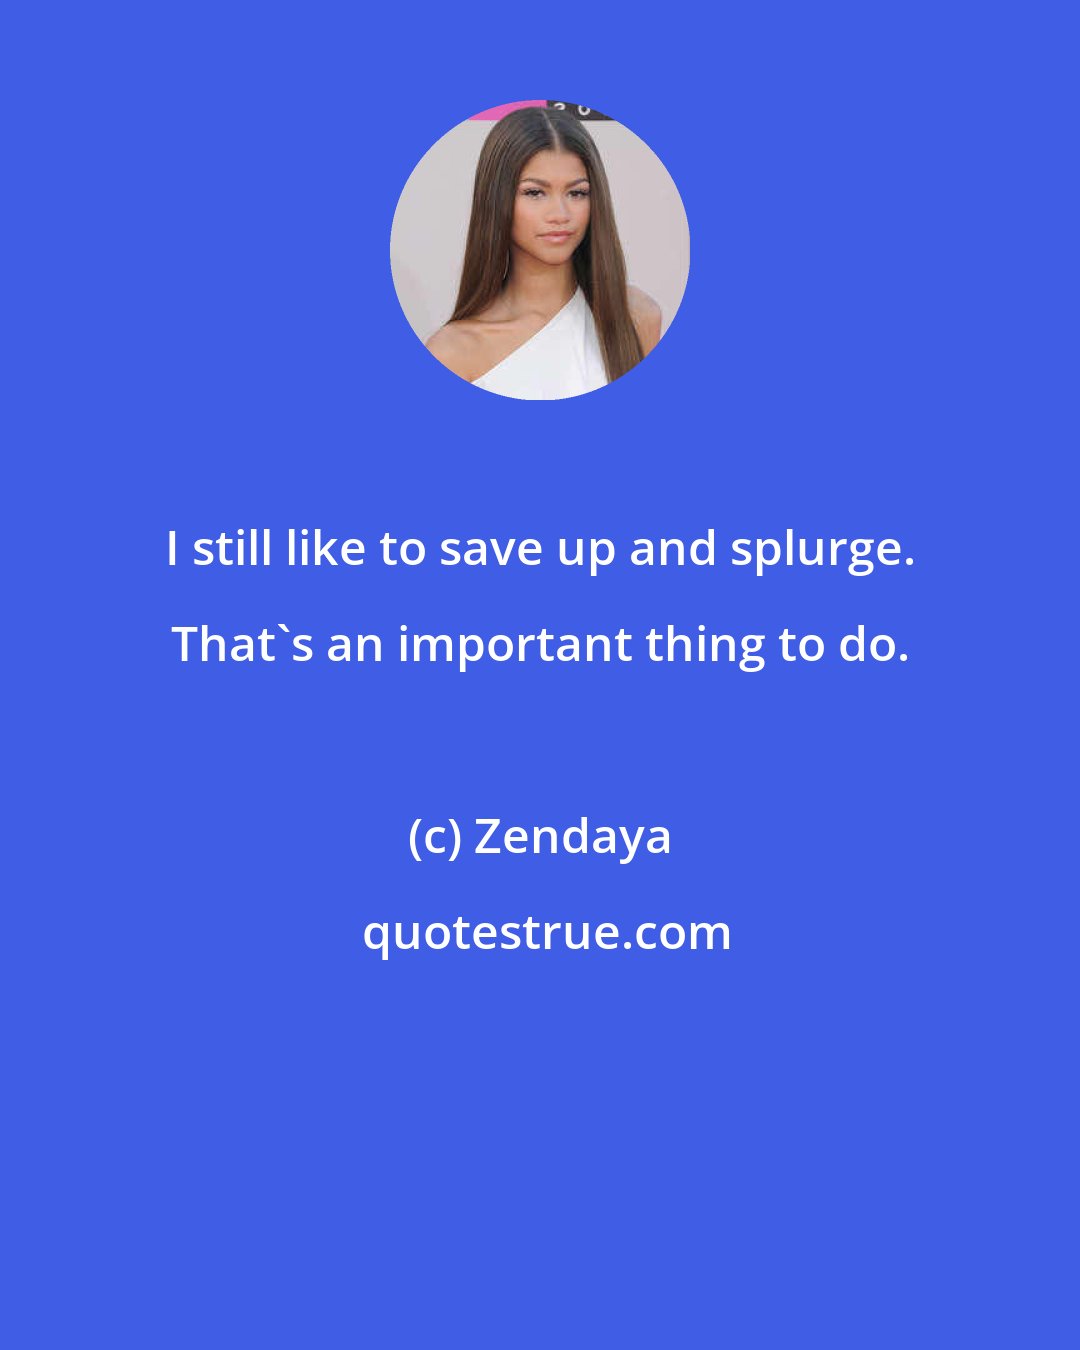 Zendaya: I still like to save up and splurge. That's an important thing to do.